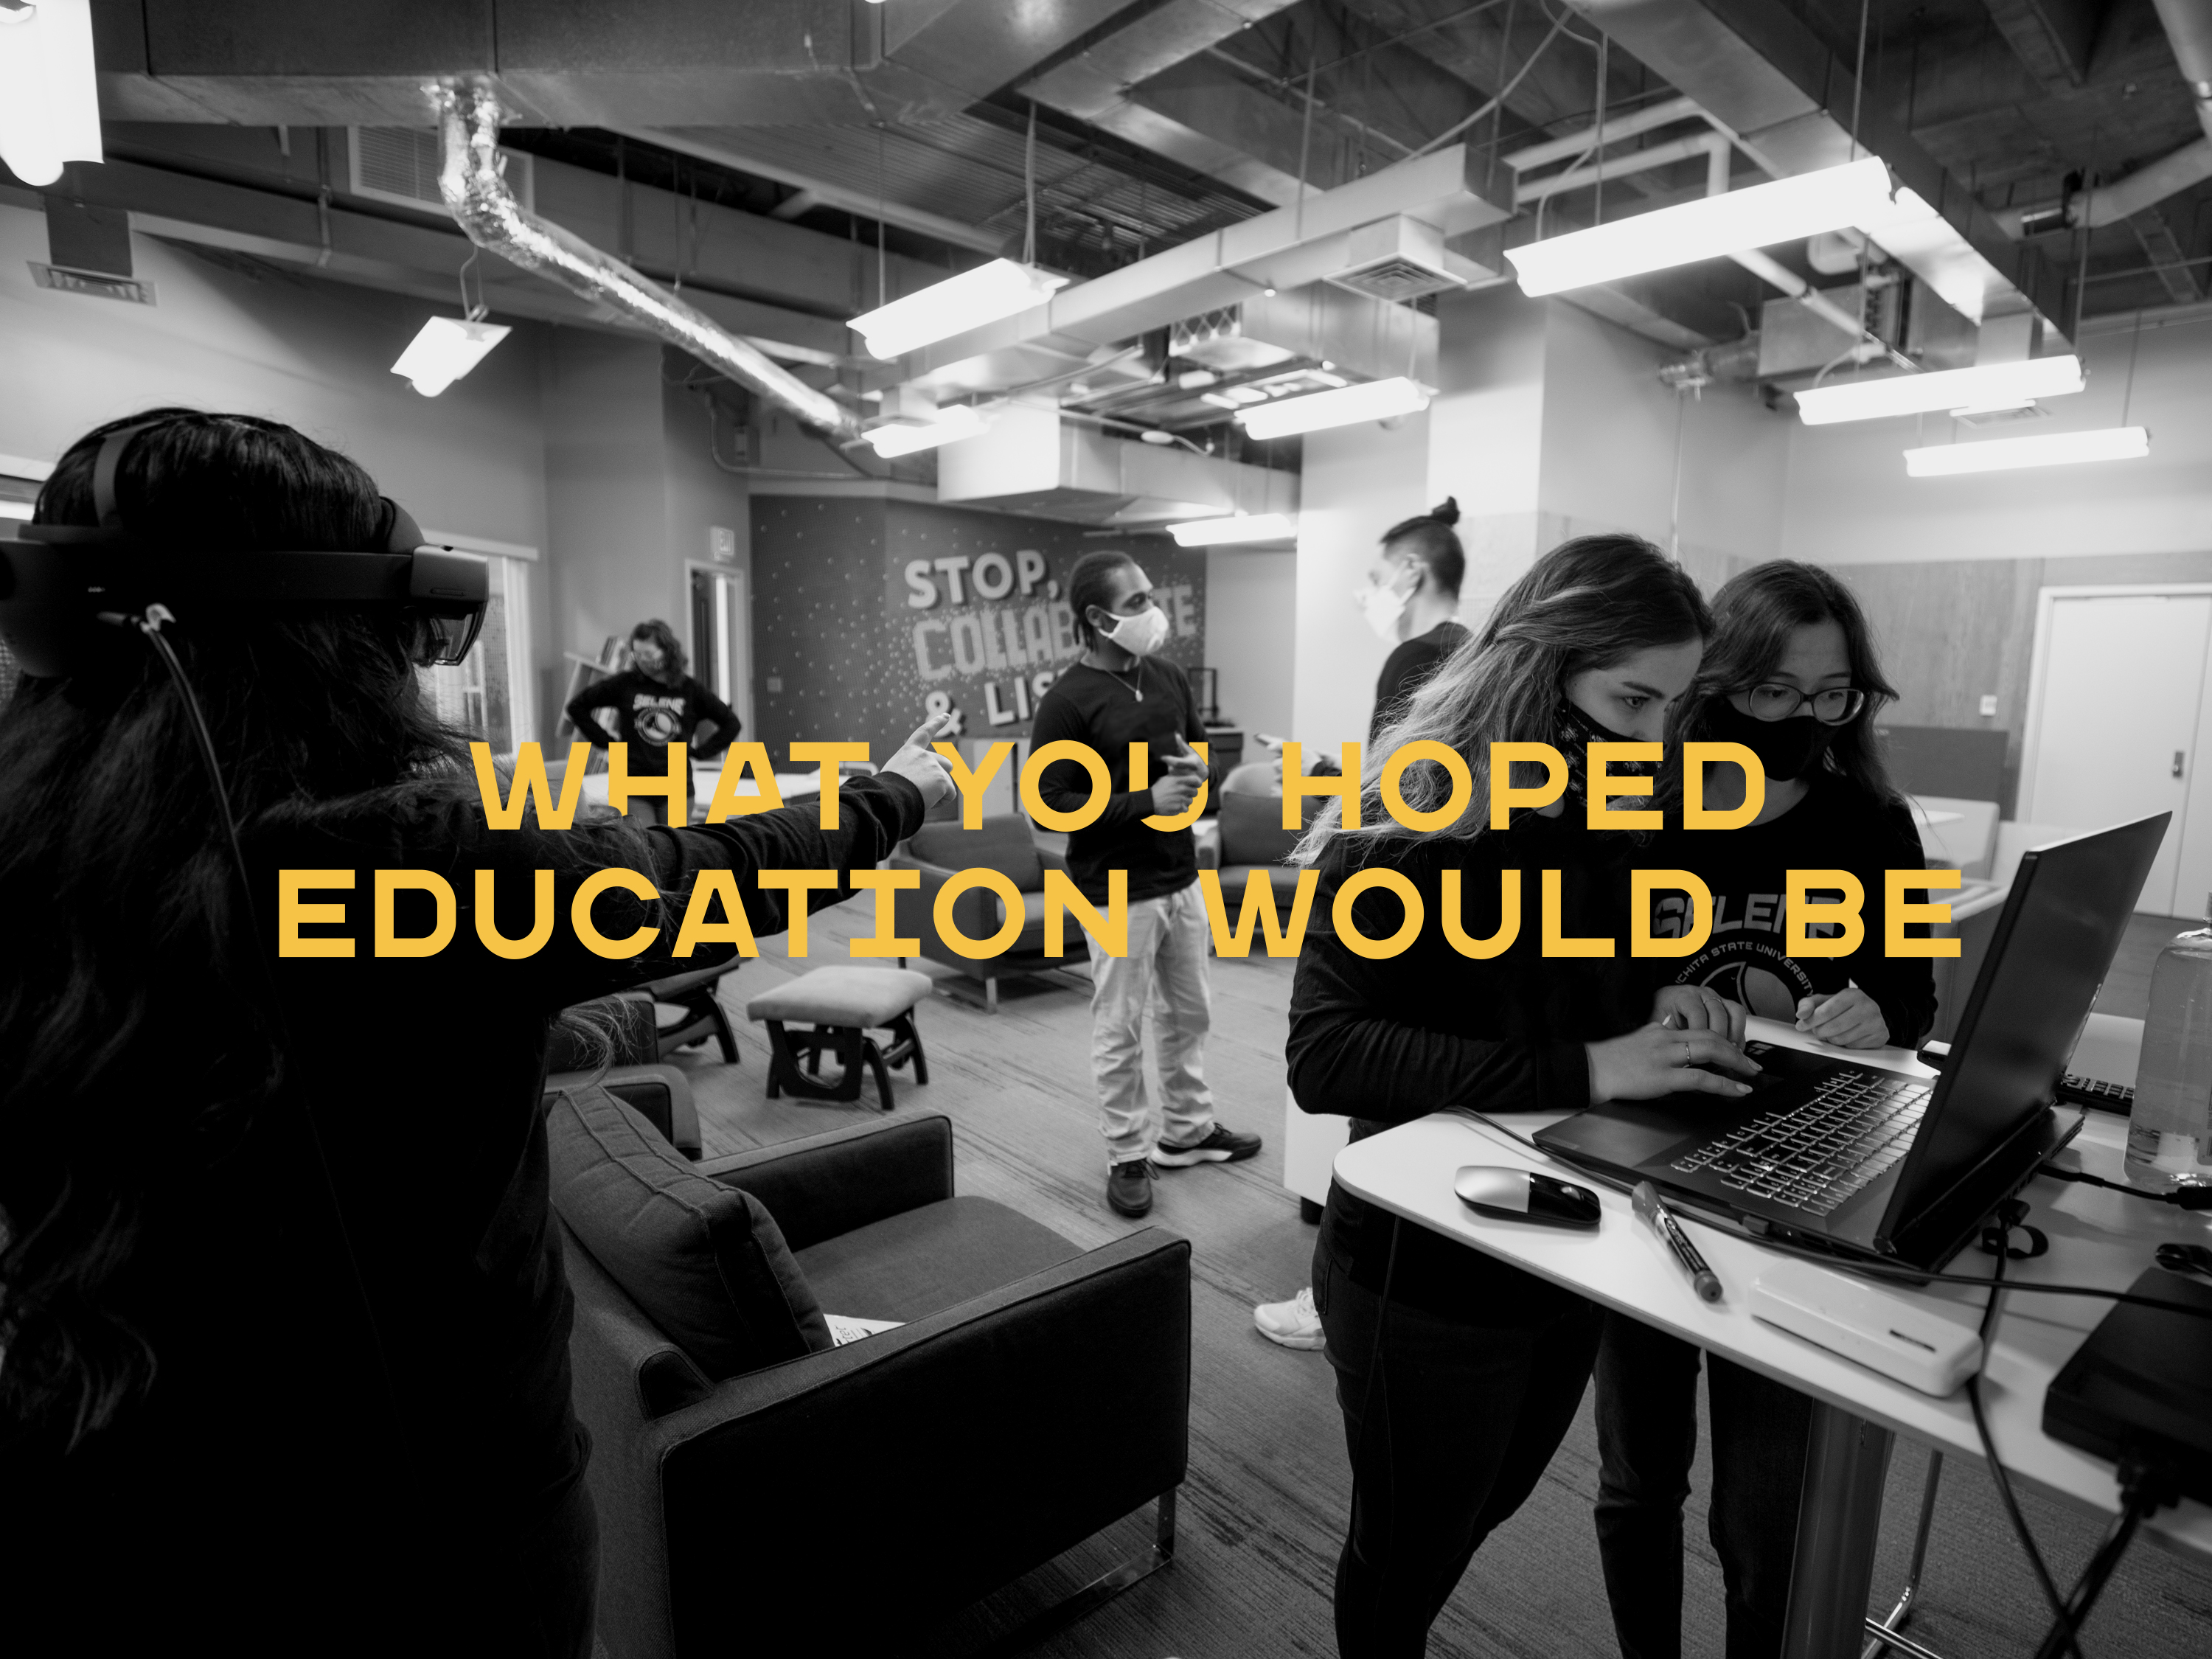 College of Innovation and Design students collaborate in Widget. "What you hoped education would be"